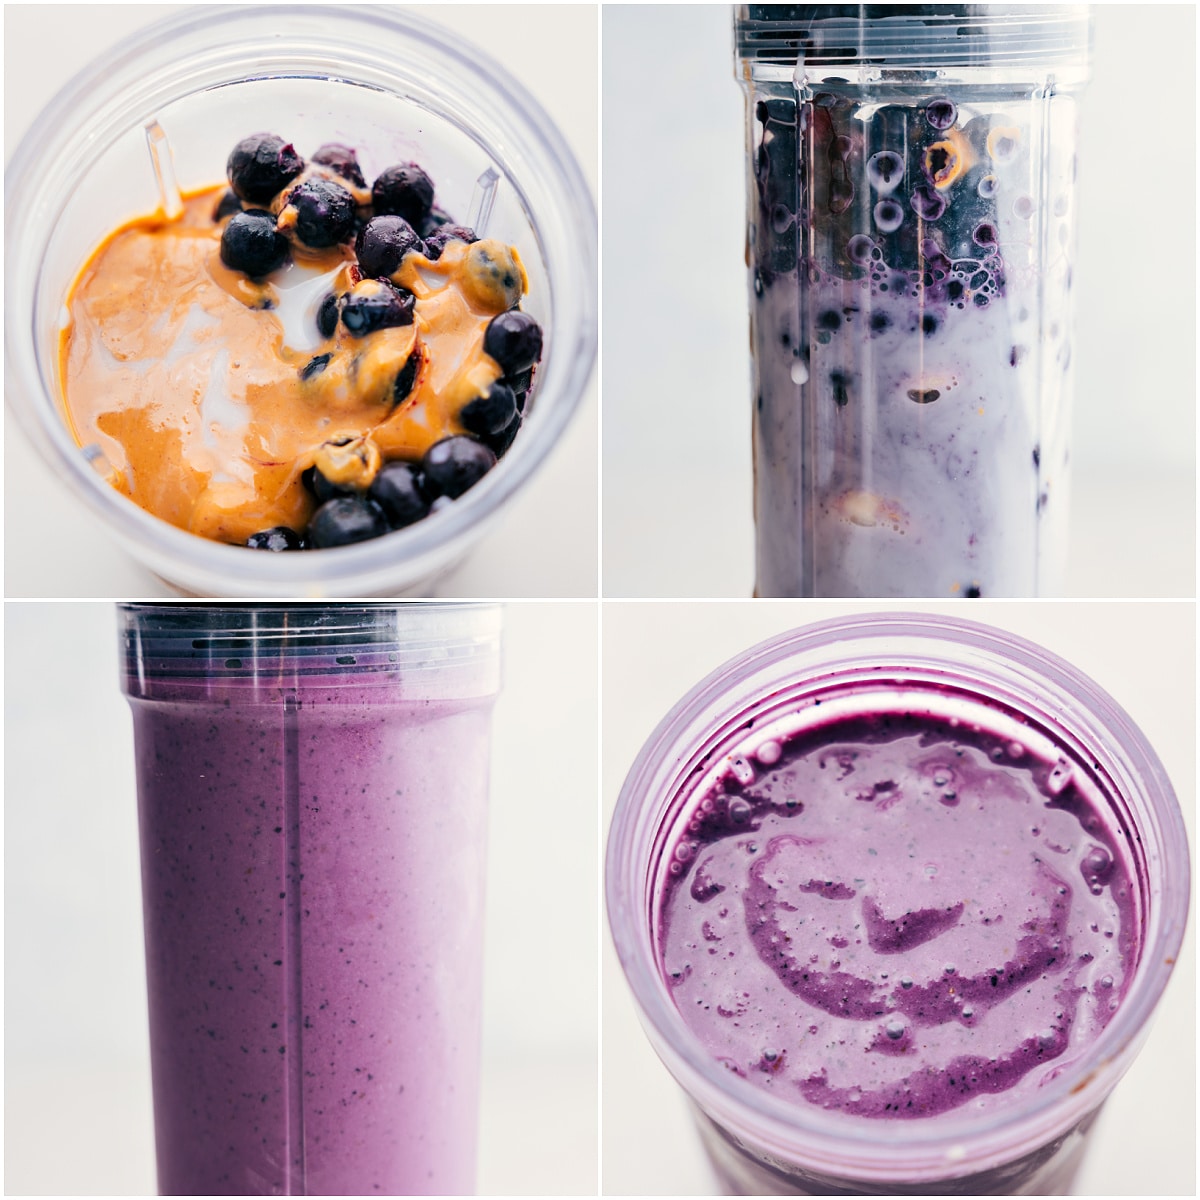 The four ingredients in this blueberry smoothie being added to a blender for a creamy breakfast.